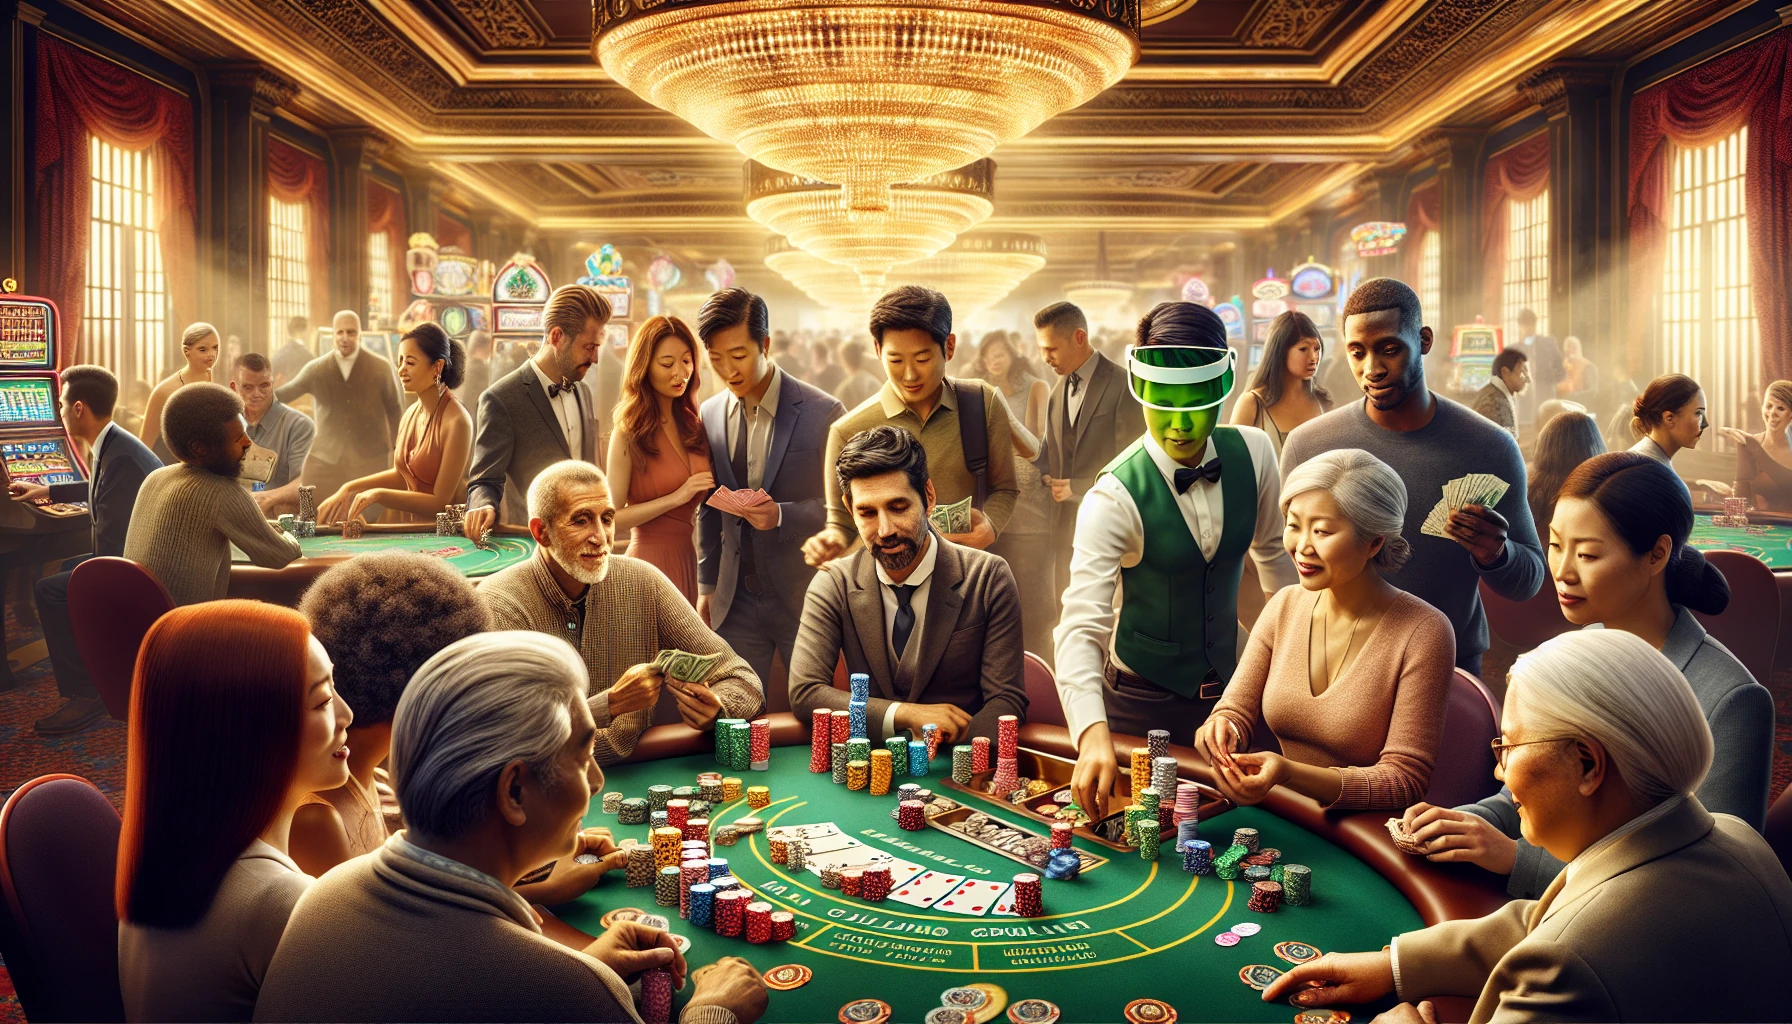 Illustration of a bustling casino with live table games and guests enjoying the gaming experience